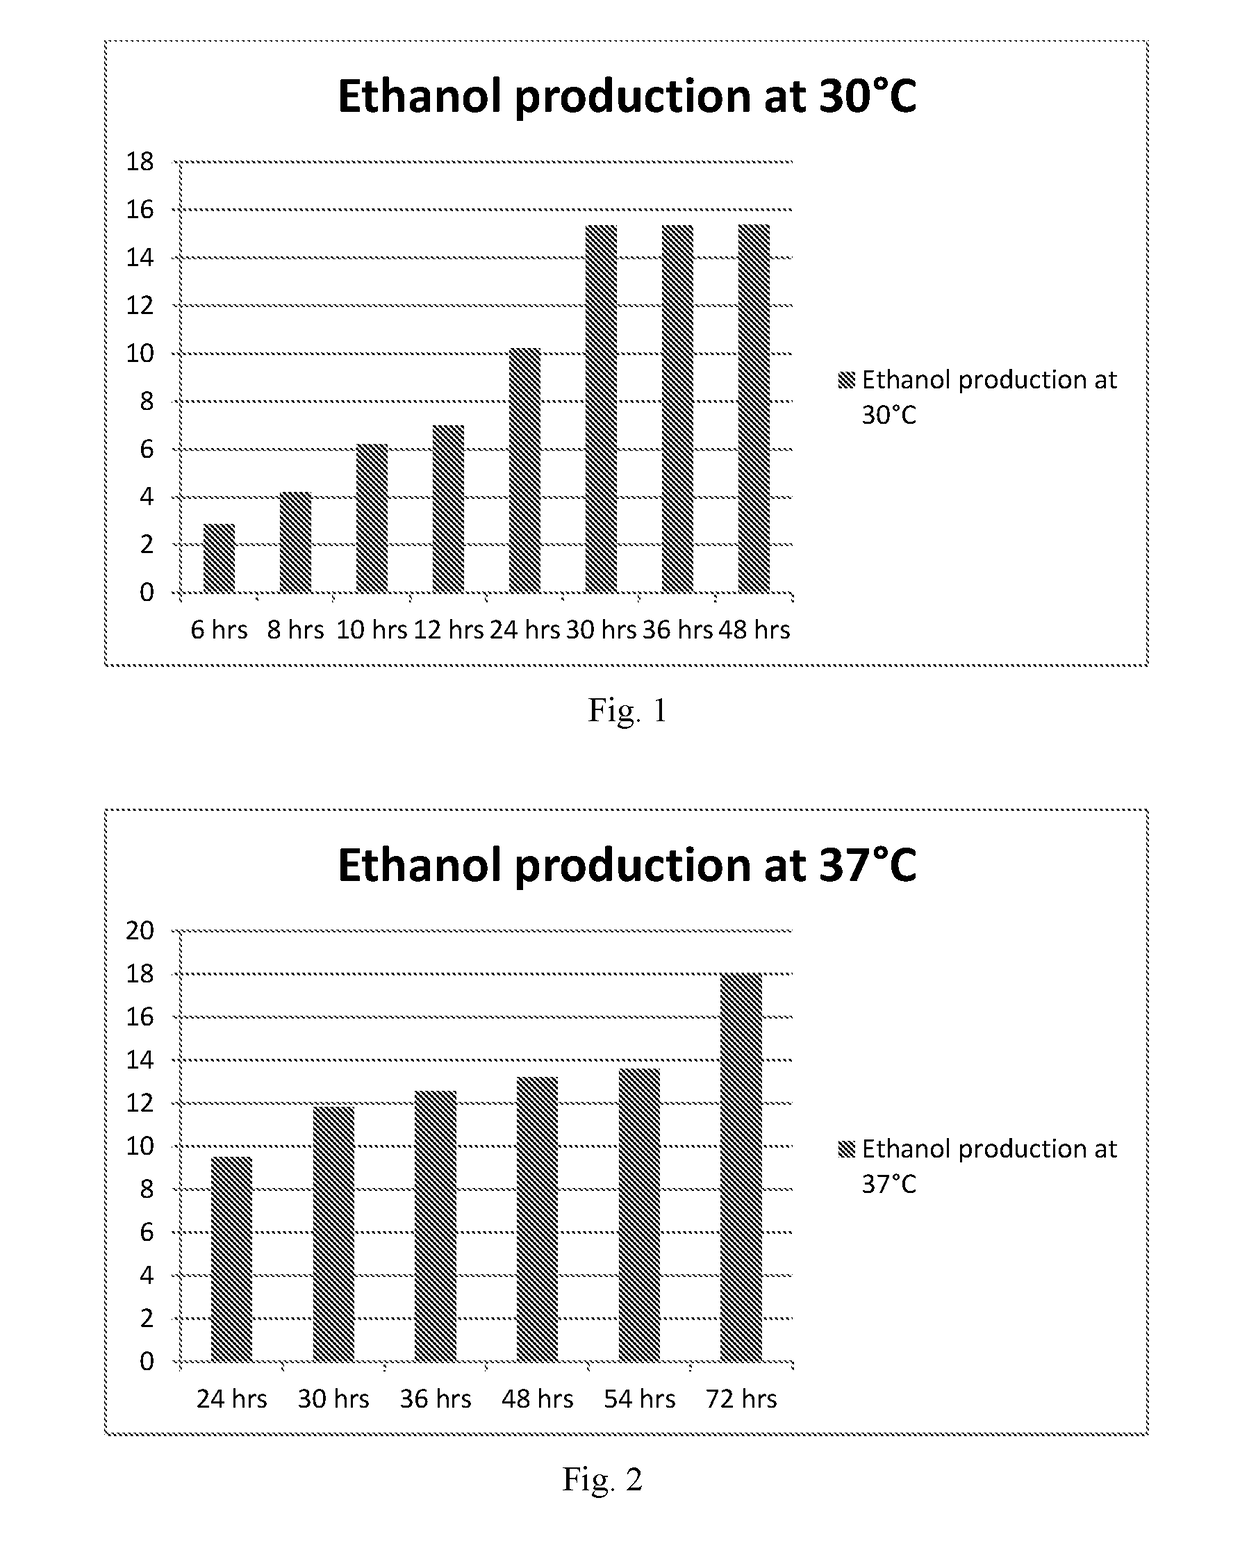 A Method Of Producing High Amount Of Ethanol At High Temperature By Modified Yeast Strain Saccharomyces Cerevisiae